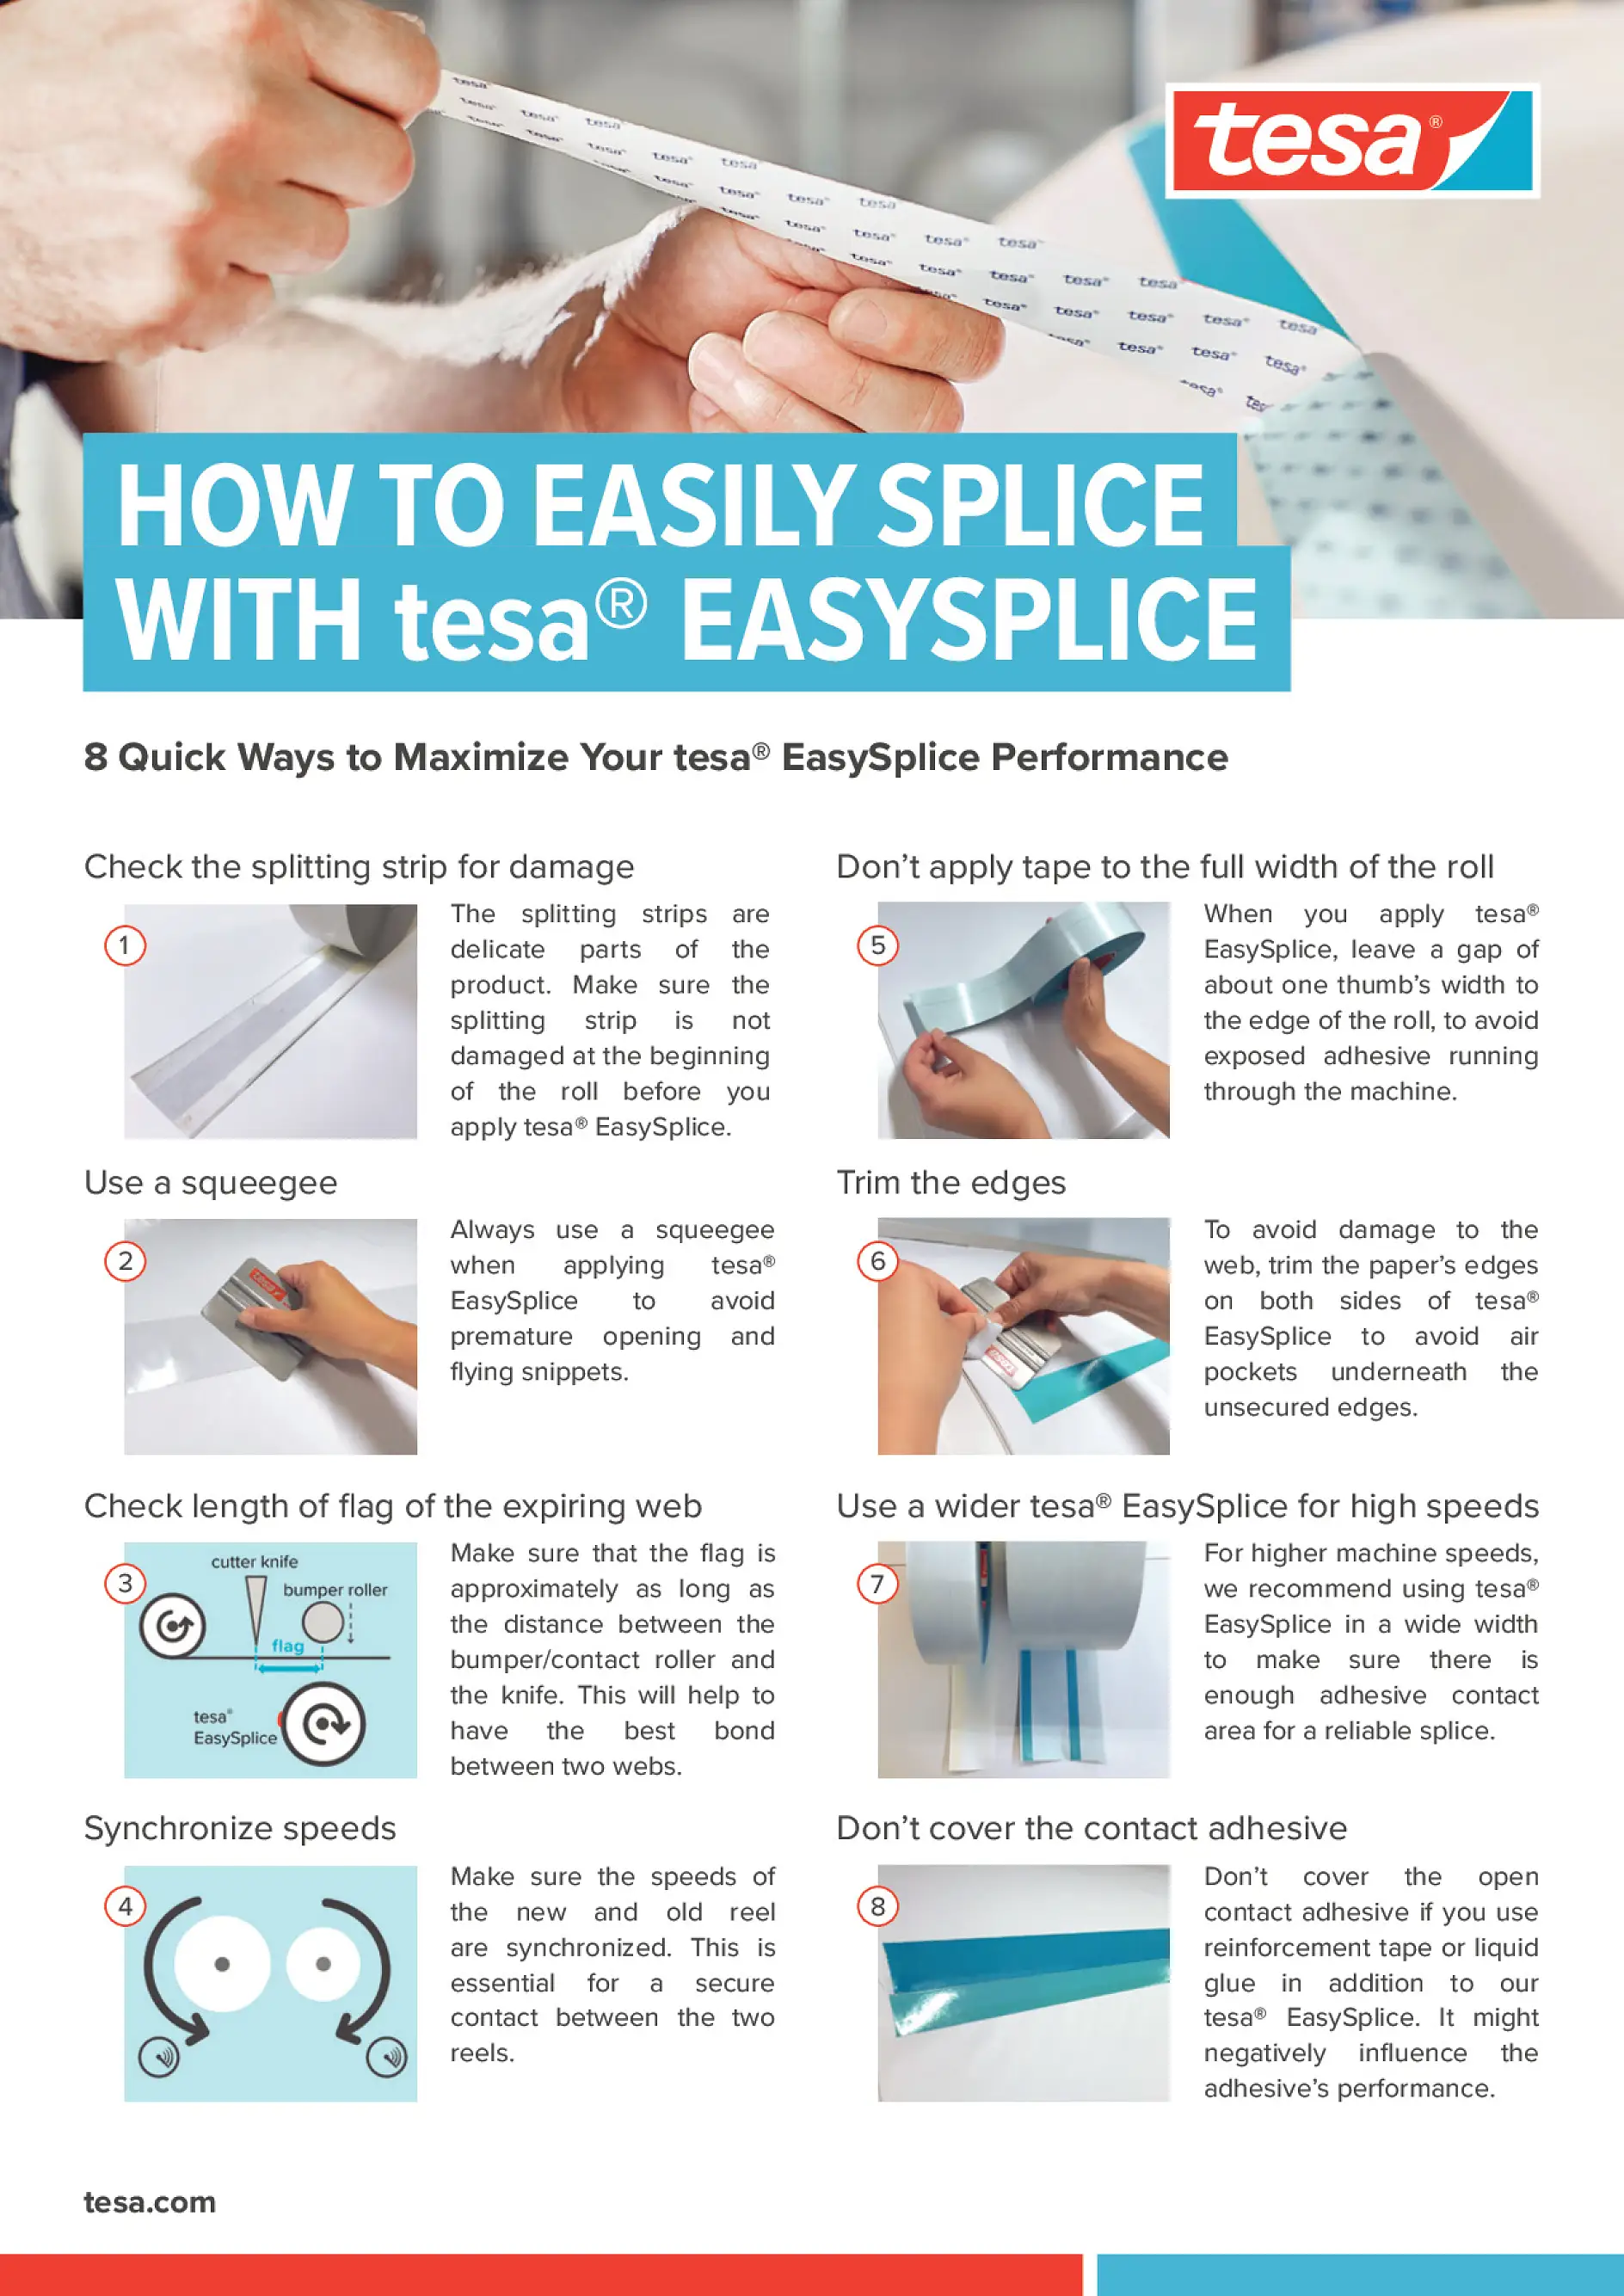 tesa-flyer-how-to-easily-splice-view (1)